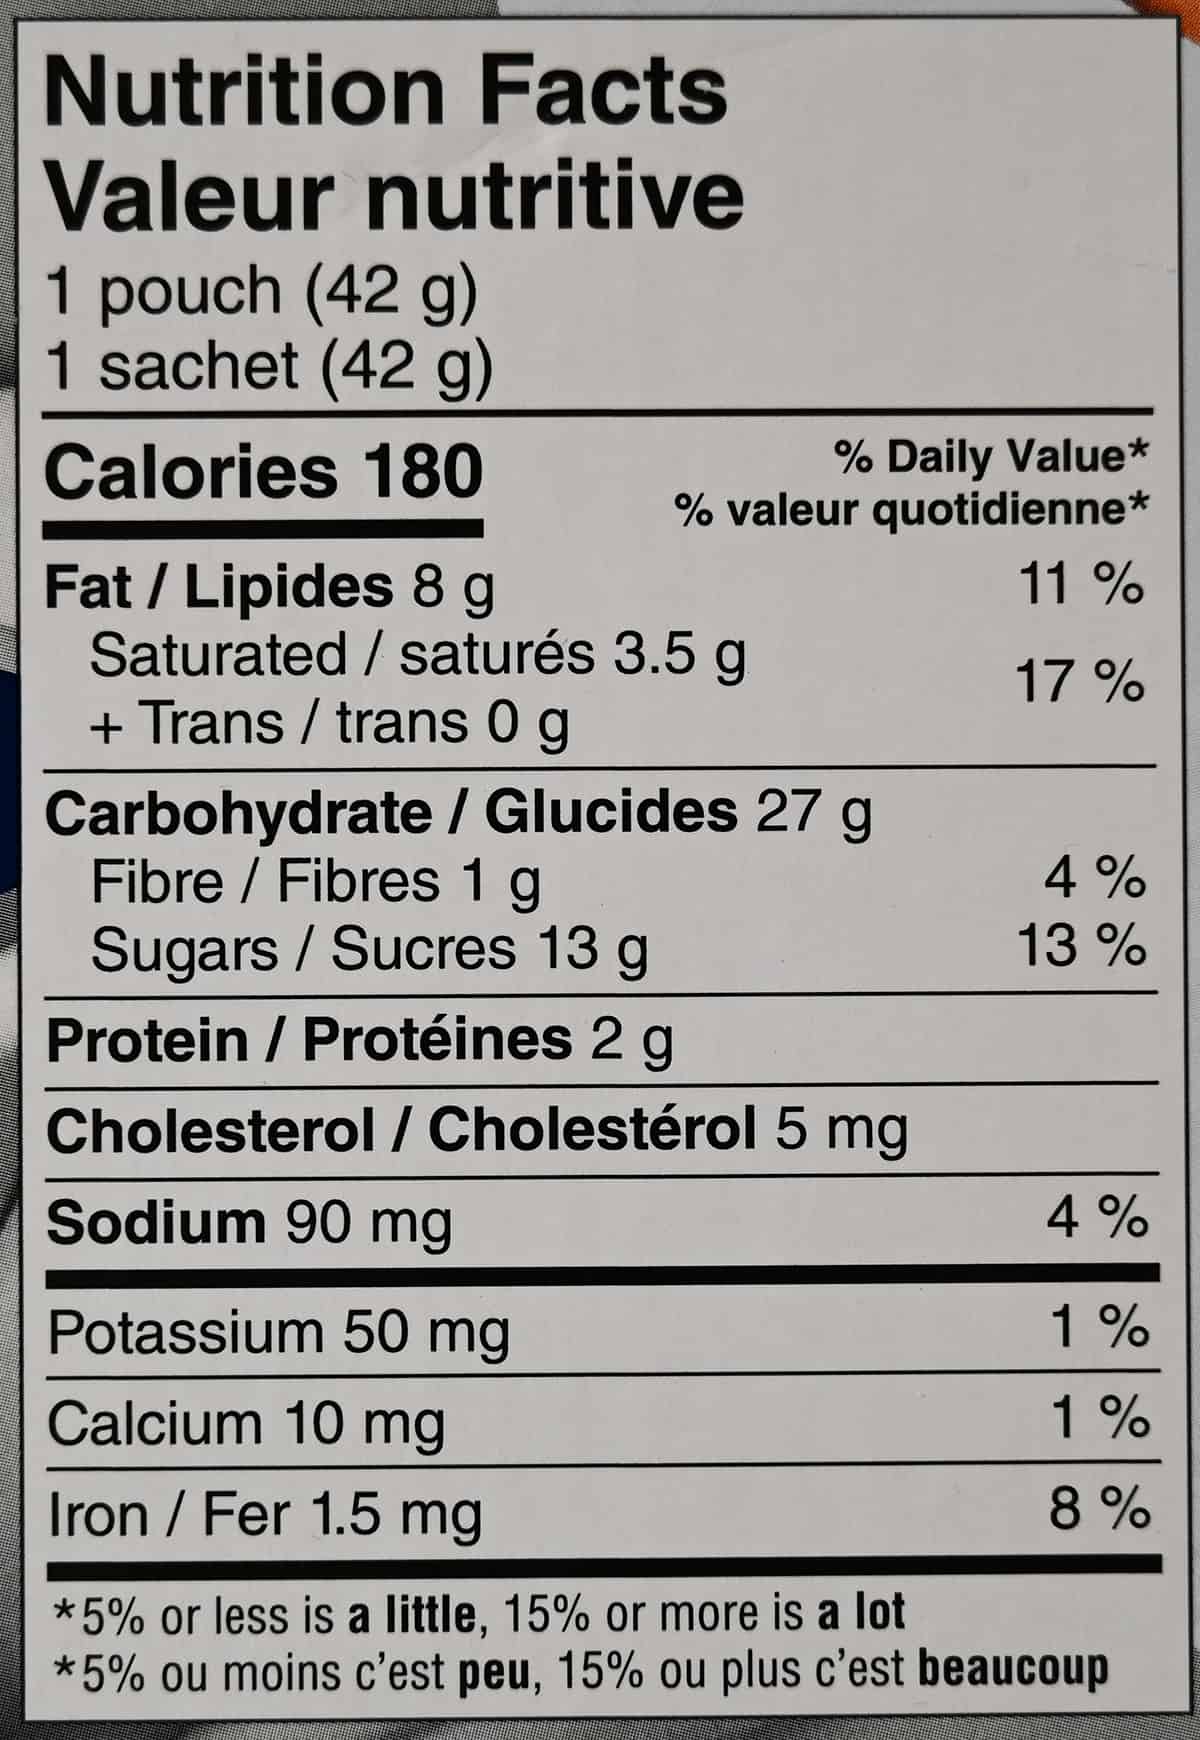 Image of the nutrition facts label for the cookies from the box.